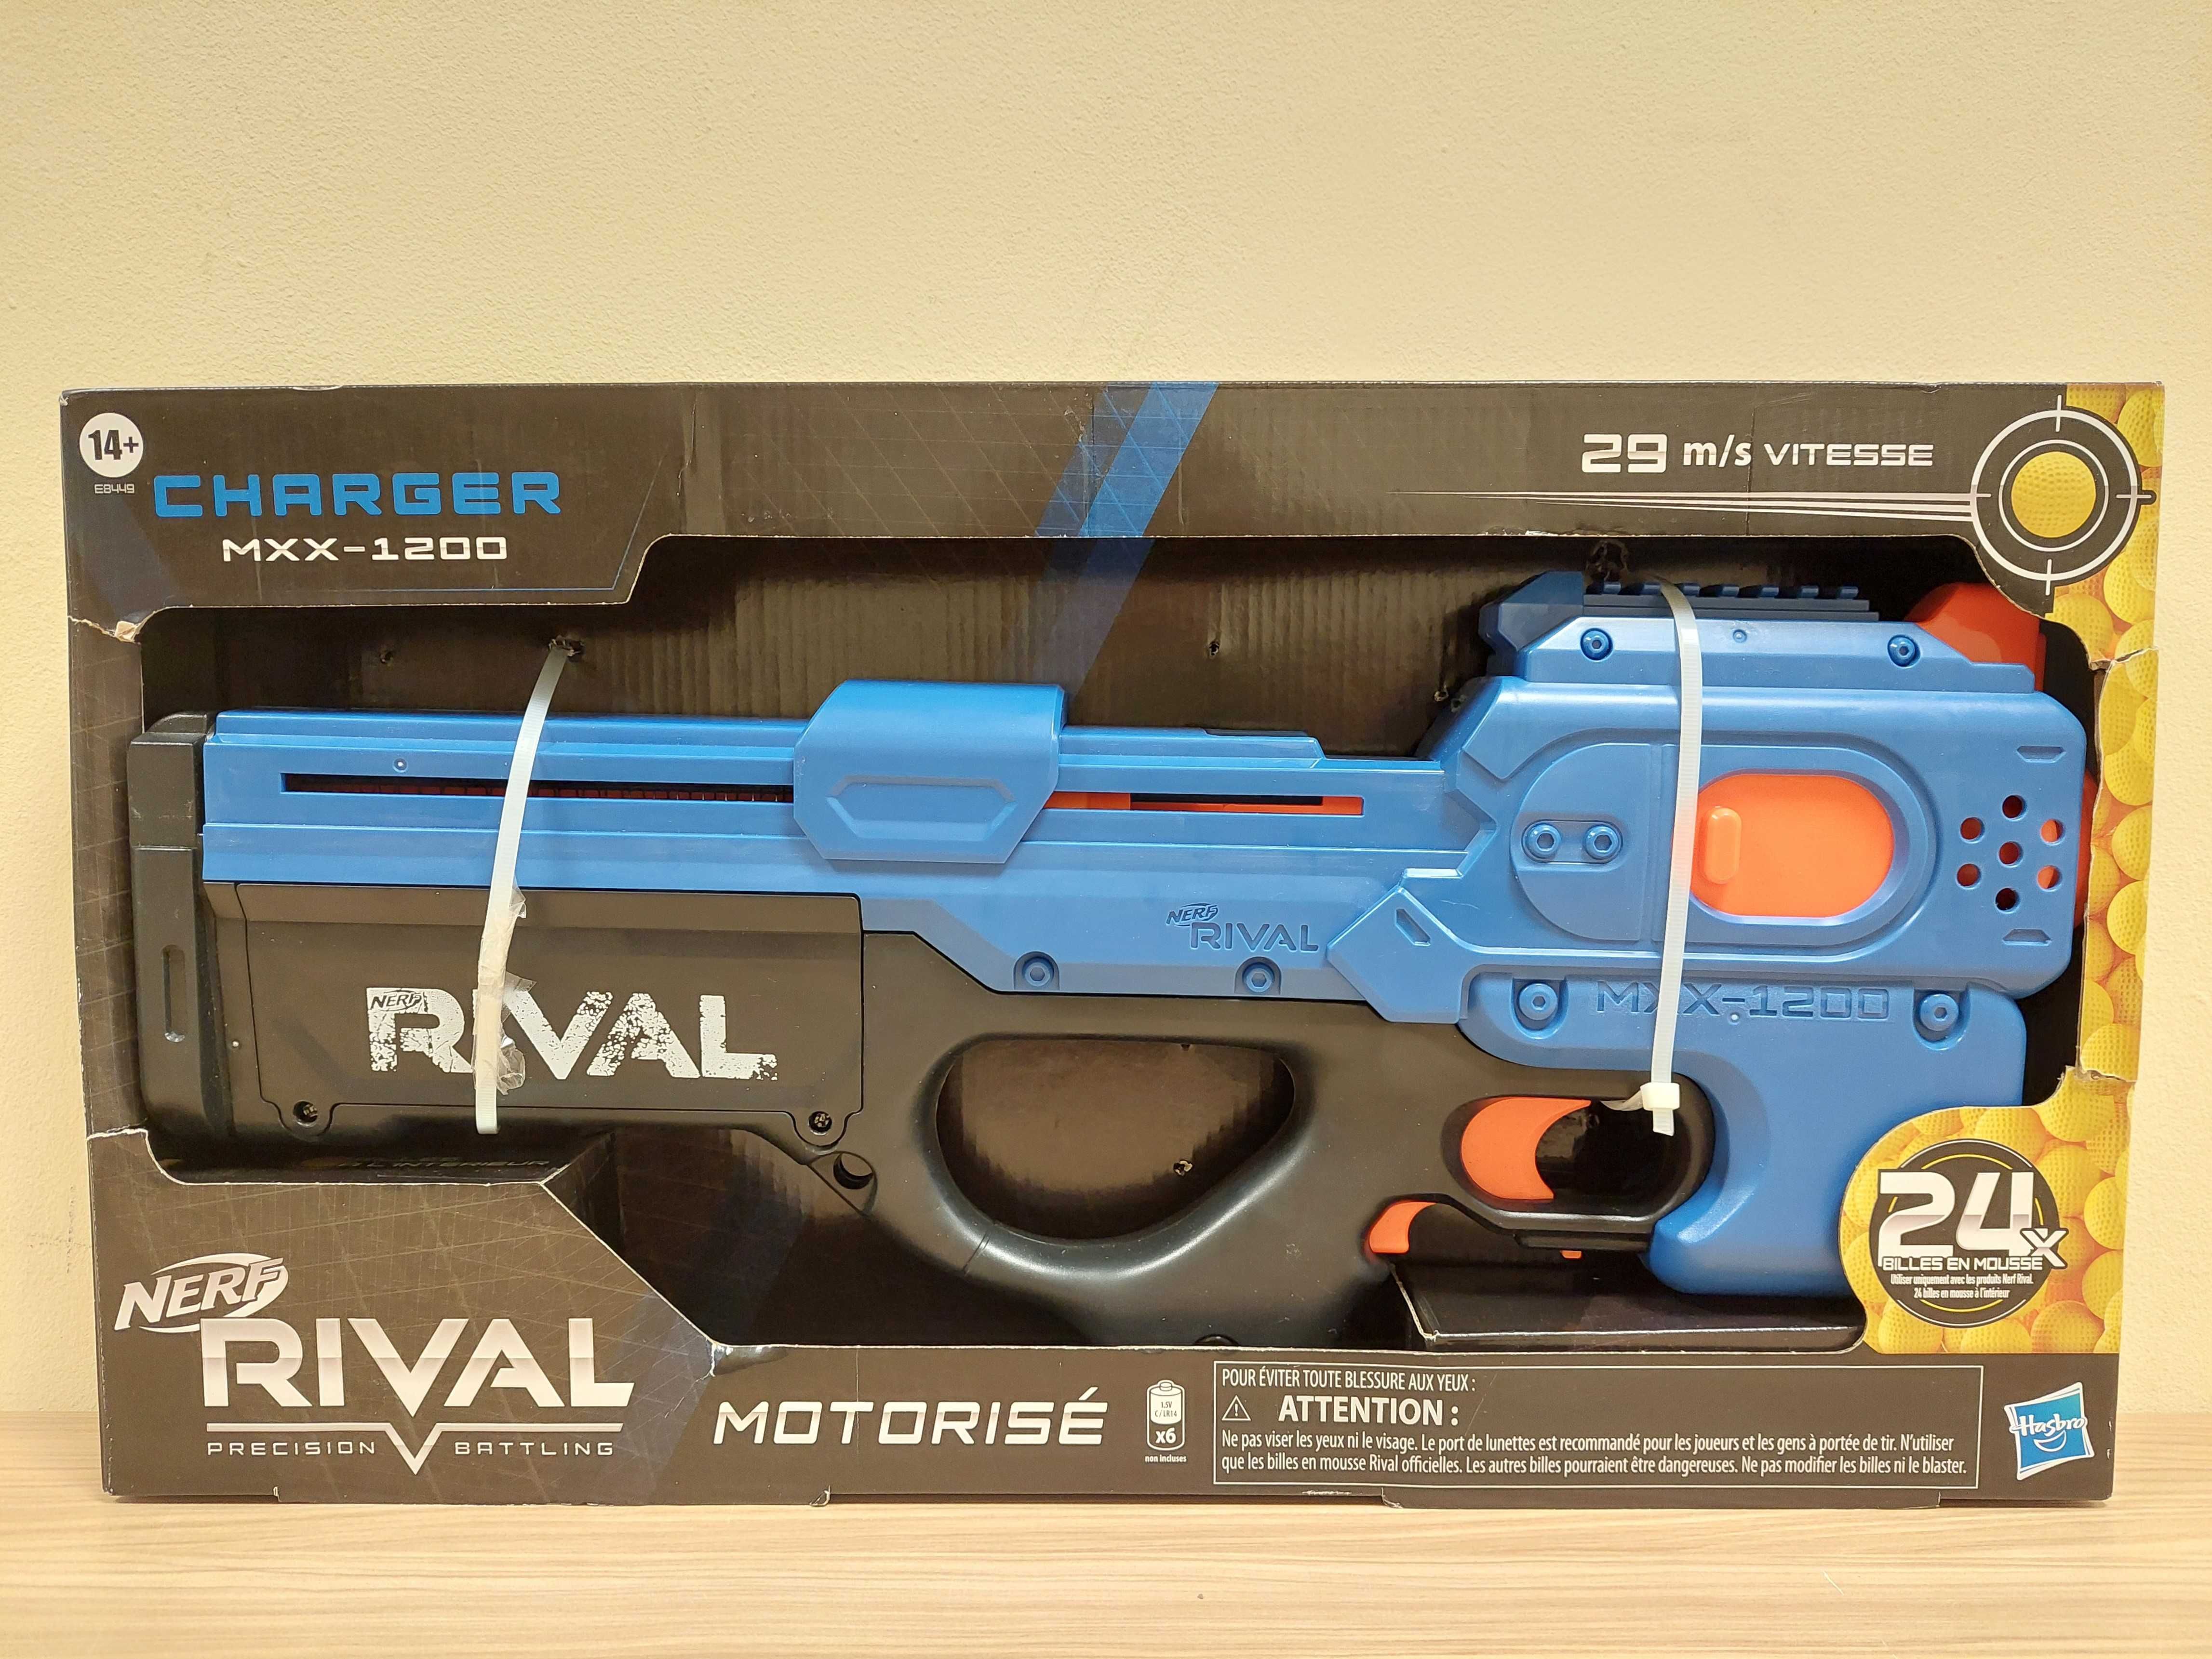 NERF E8449 RIVAL CHARGER Karabin automatyczny na baterie N21 A